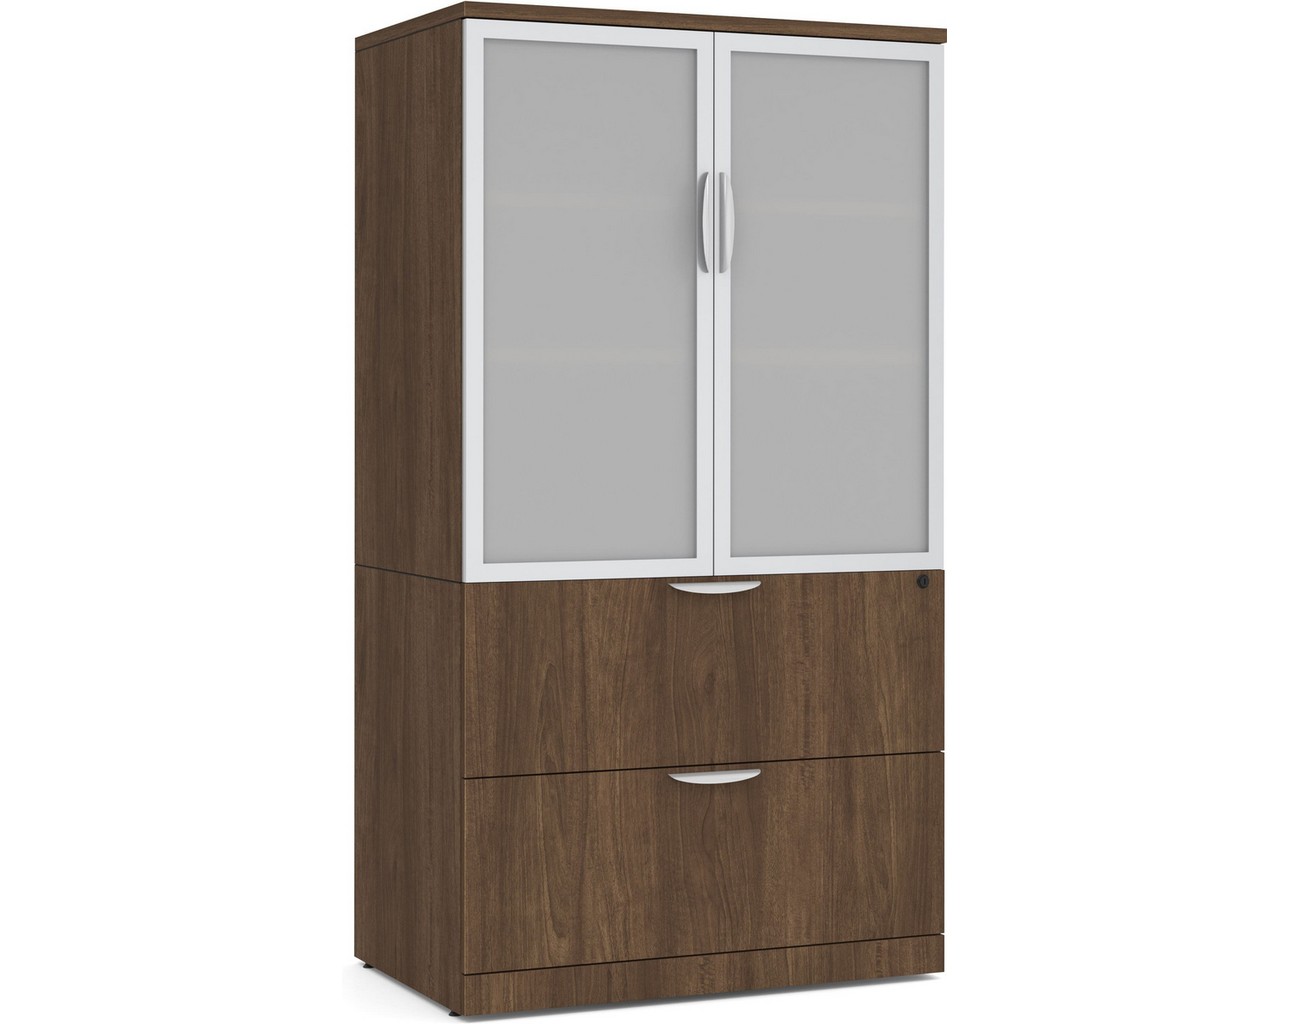 Locking Storage Cabinet and Lateral File Combo Unit with Glass Doors – Modern Walnut